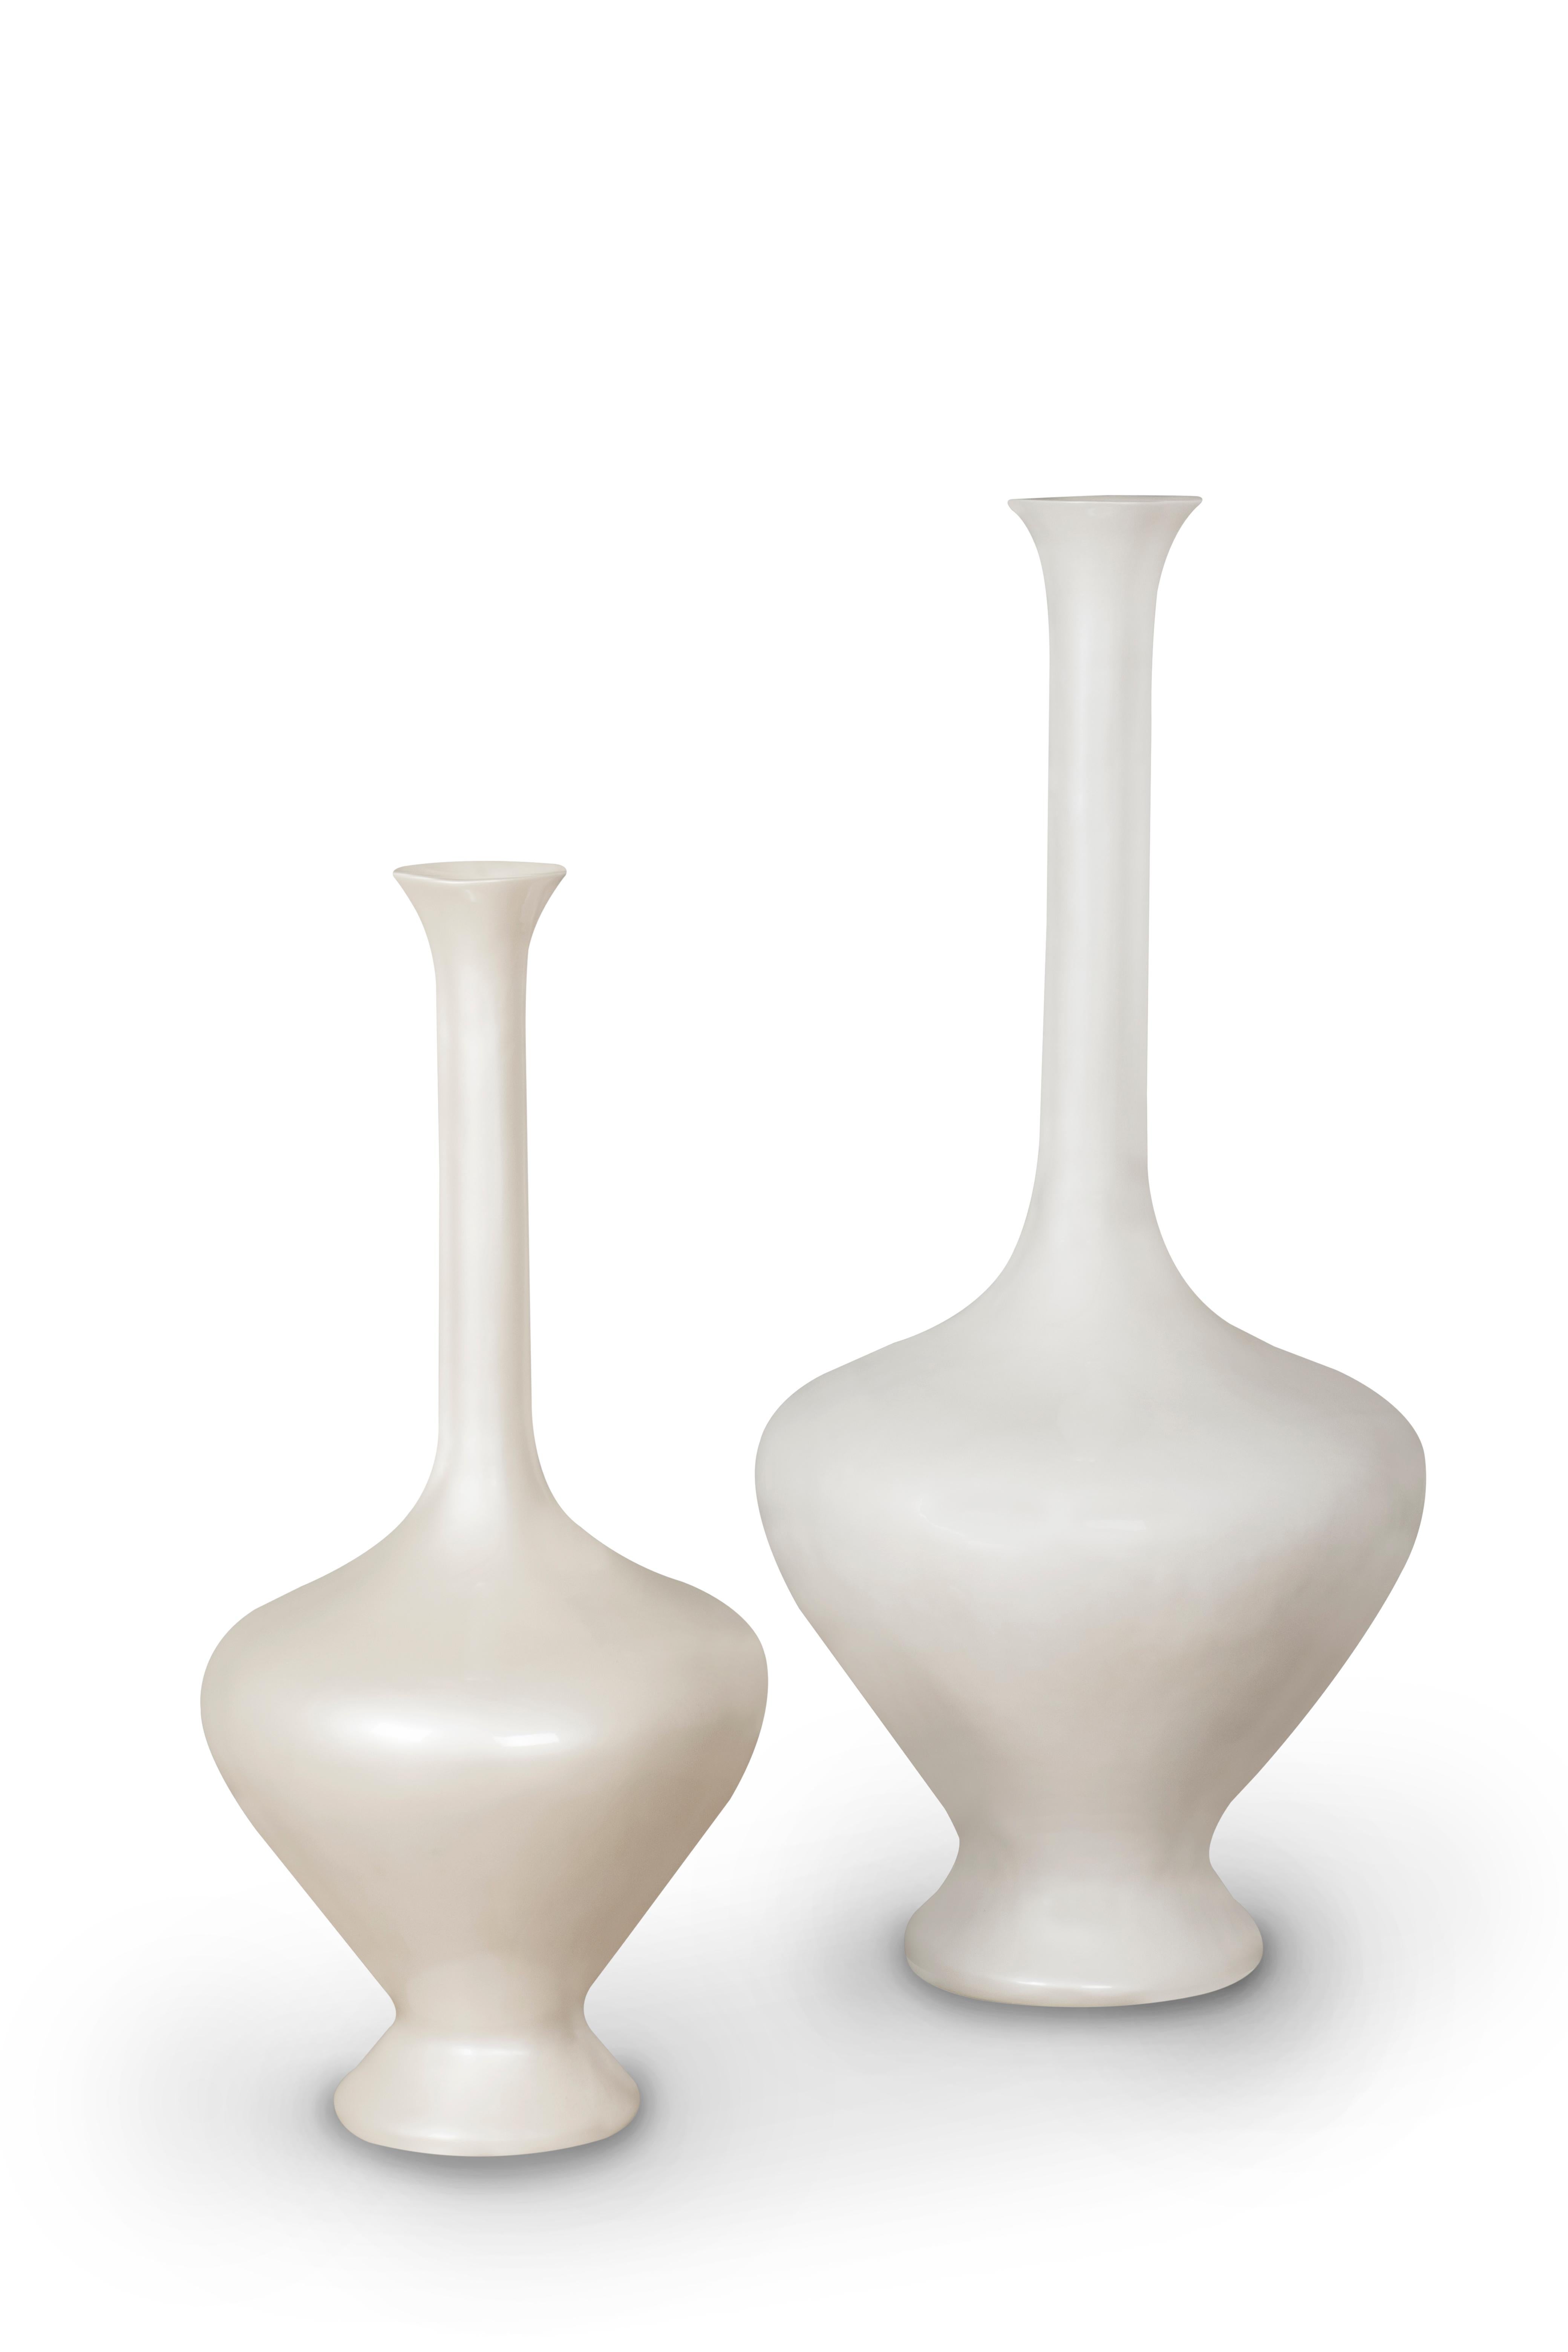 Portuguese Set/2 Decorative Floor Vases, Pearl White, Handmade by Lusitanus Home For Sale